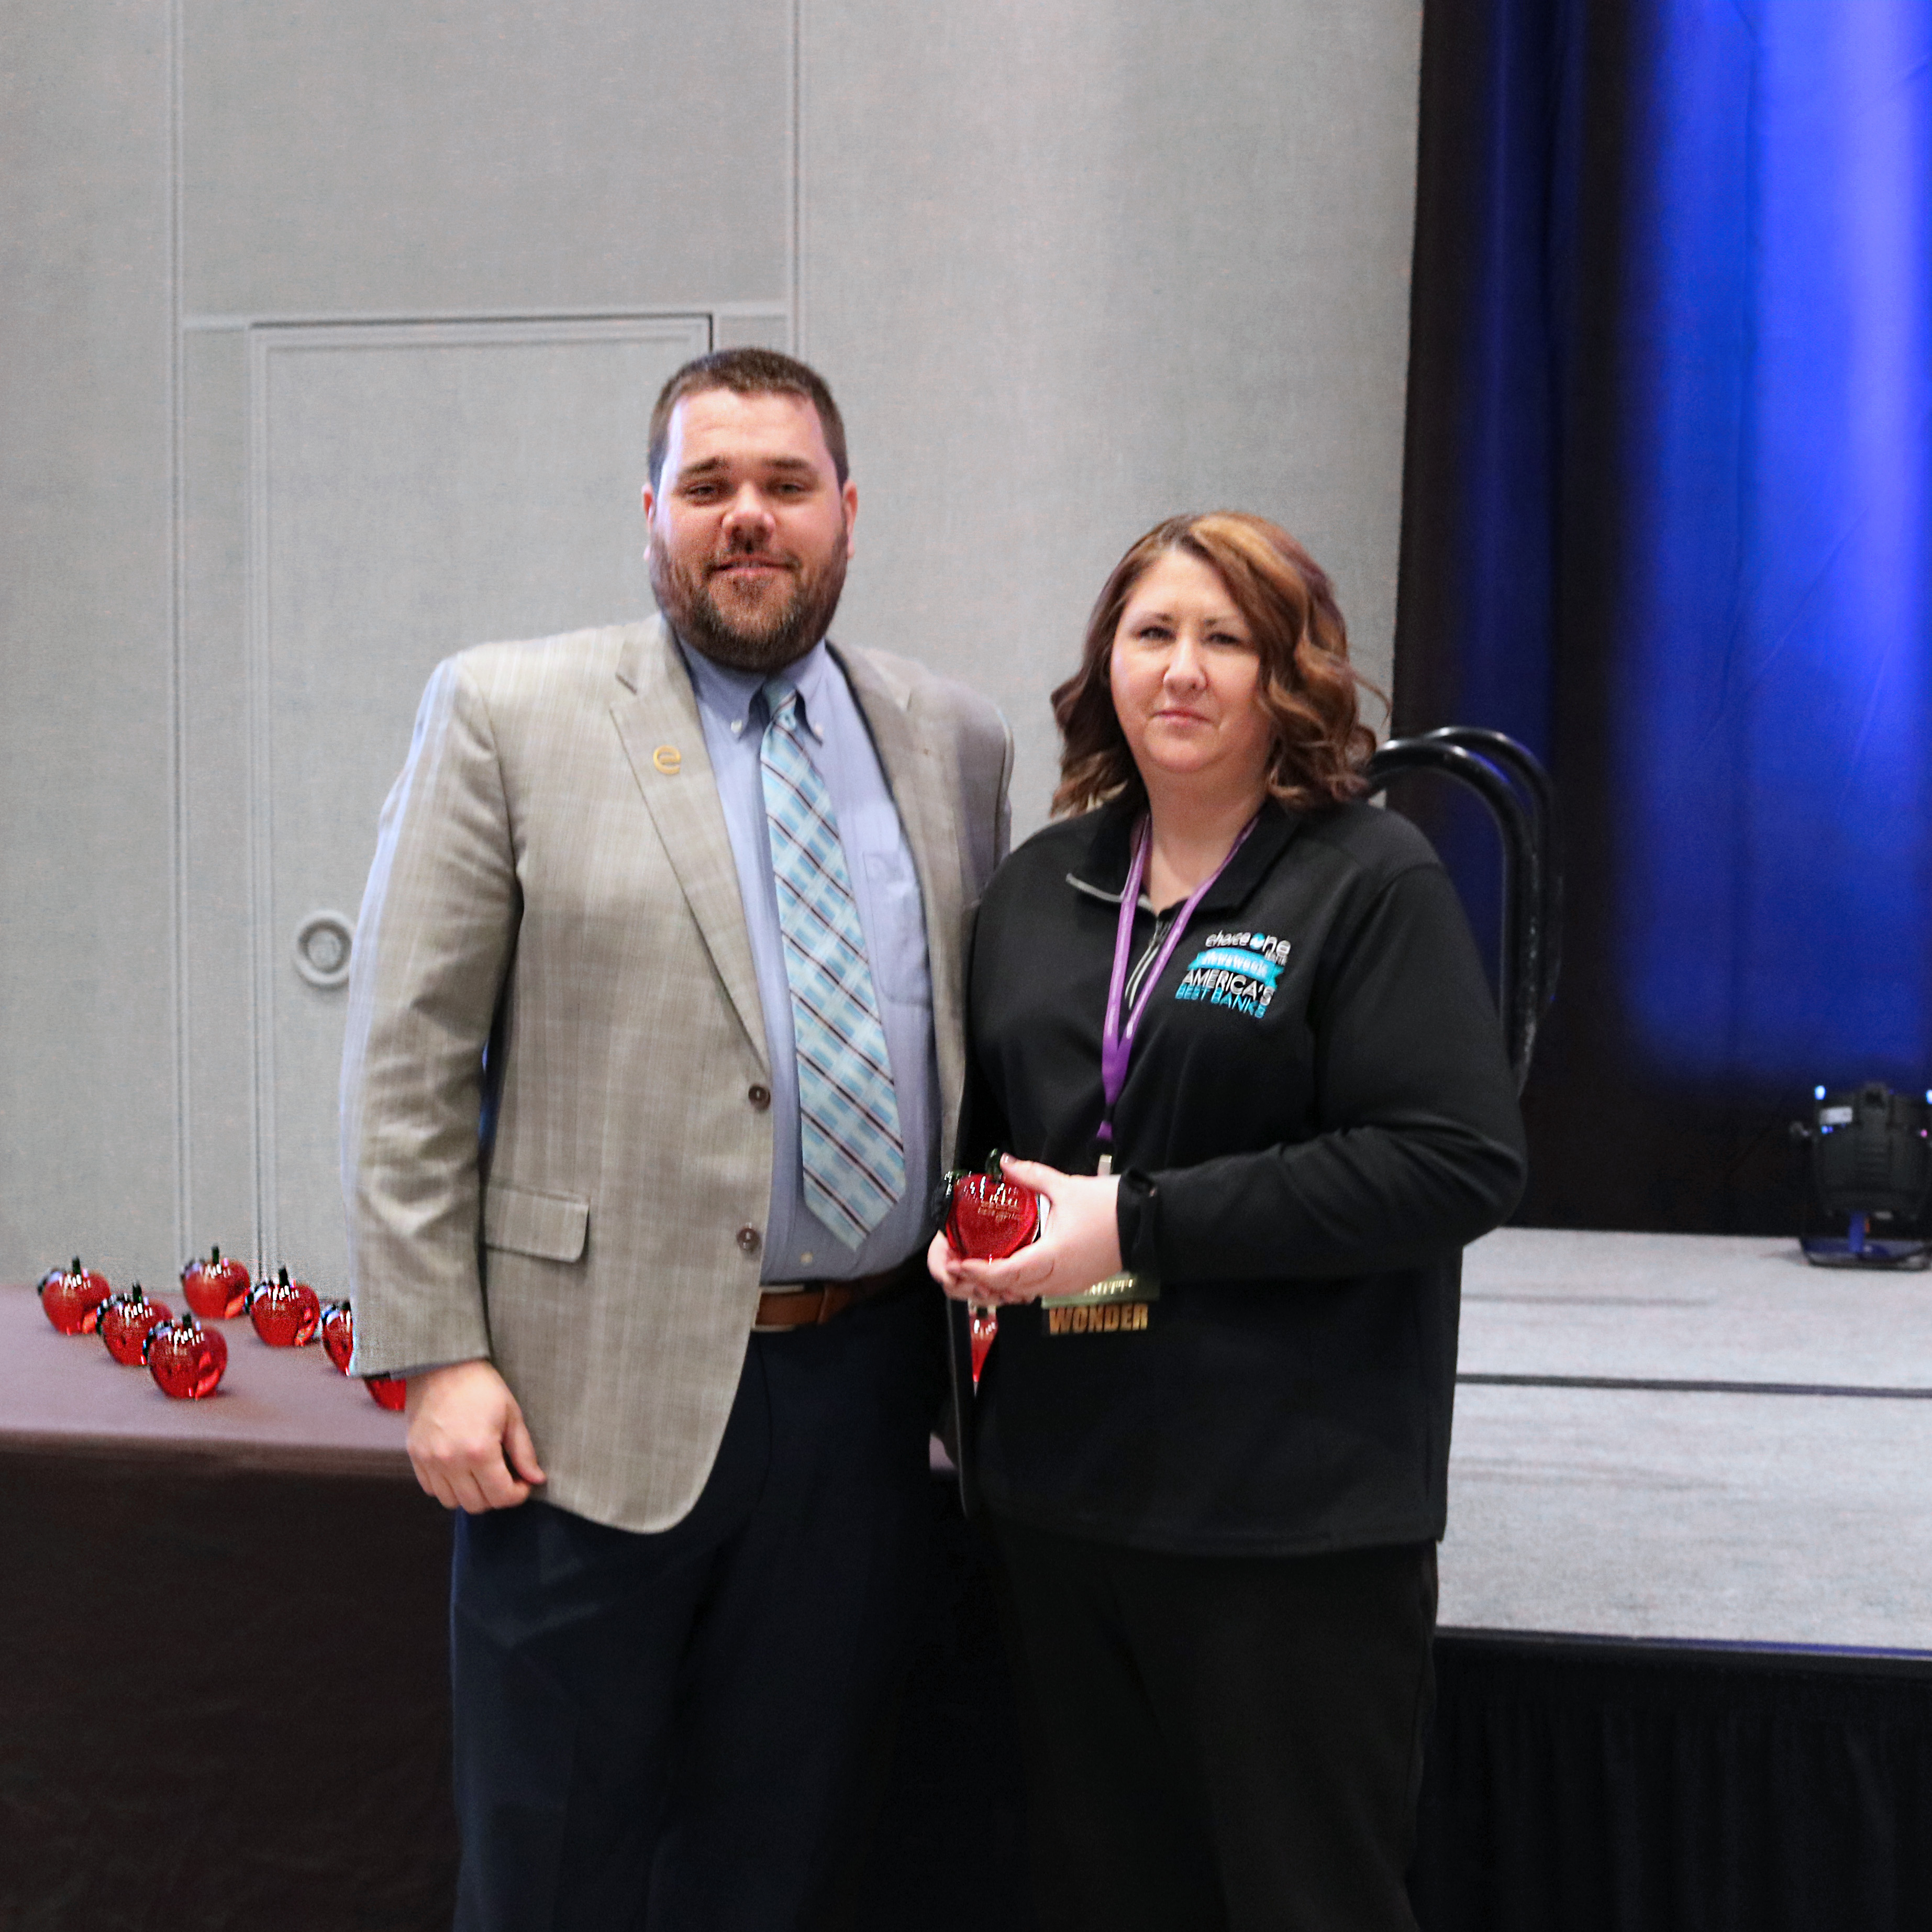 Pictured R-L: Danielle Chateauvert, Vice President Marketing of ChoiceOne Bank, receiving the award from Eric McKinney, Vice Chair of the MBA Marketing Committee.